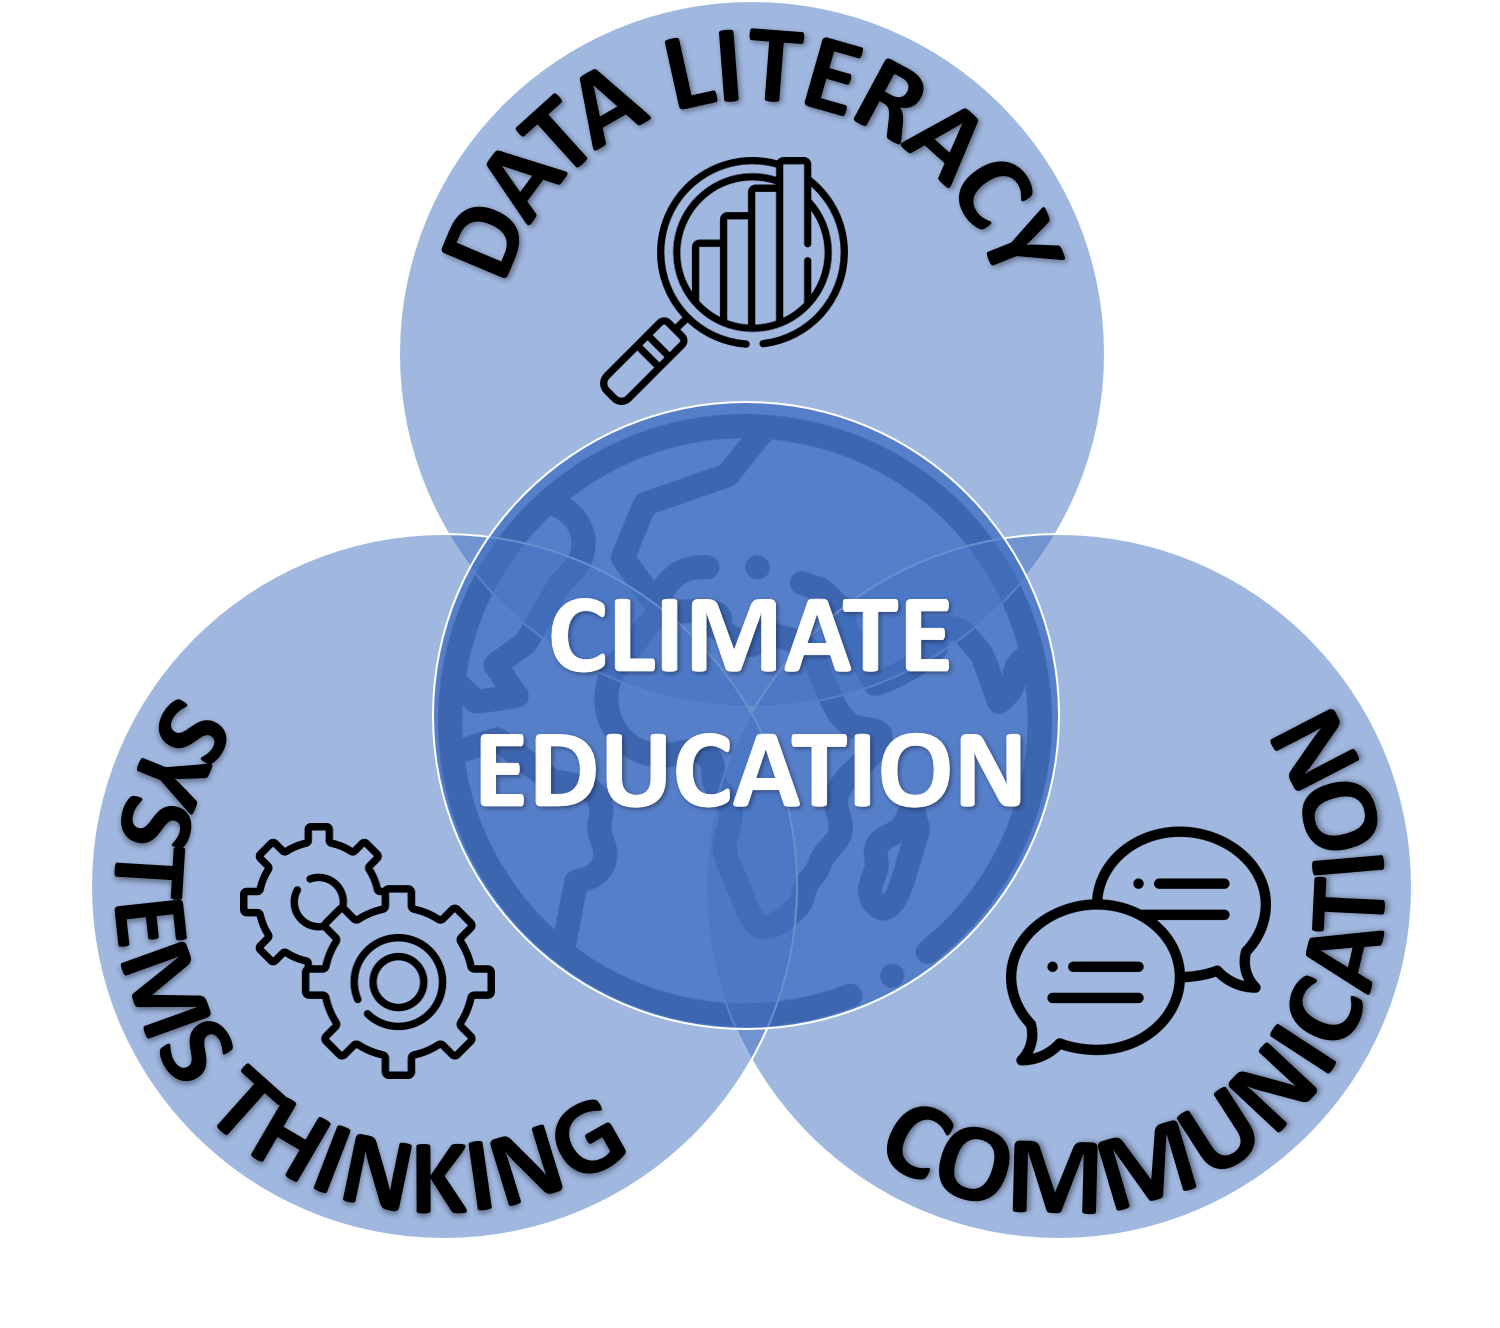 Three outer circles as sections for data literacy, communication, and systems thinking around a center circle for climate education